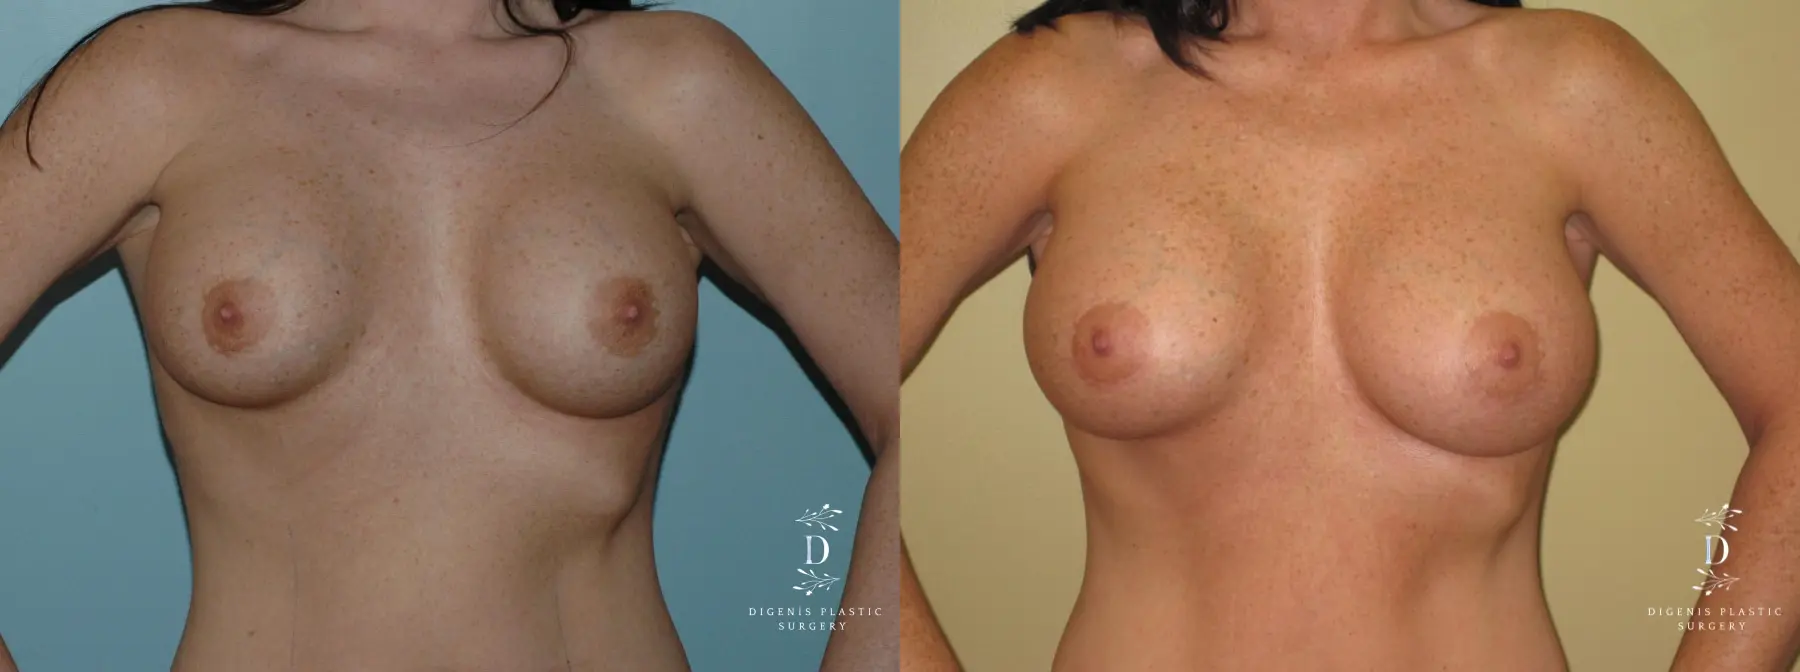 Breast Implant Exchange: Patient 1 - Before and After  